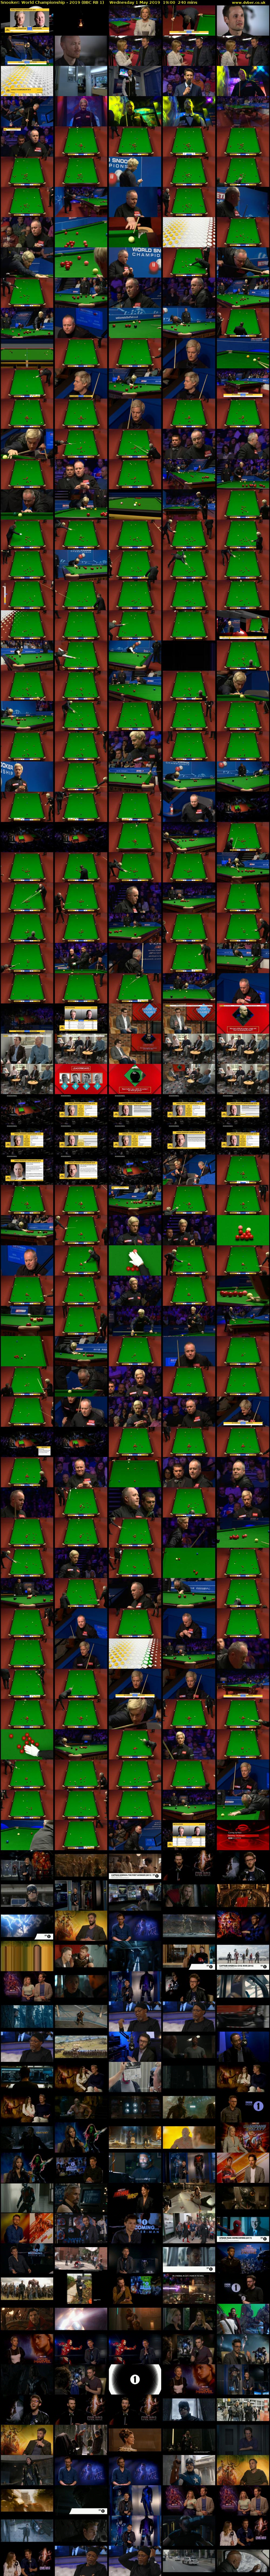 Snooker: World Championship - 2019 (BBC RB 1) Wednesday 1 May 2019 19:00 - 23:00